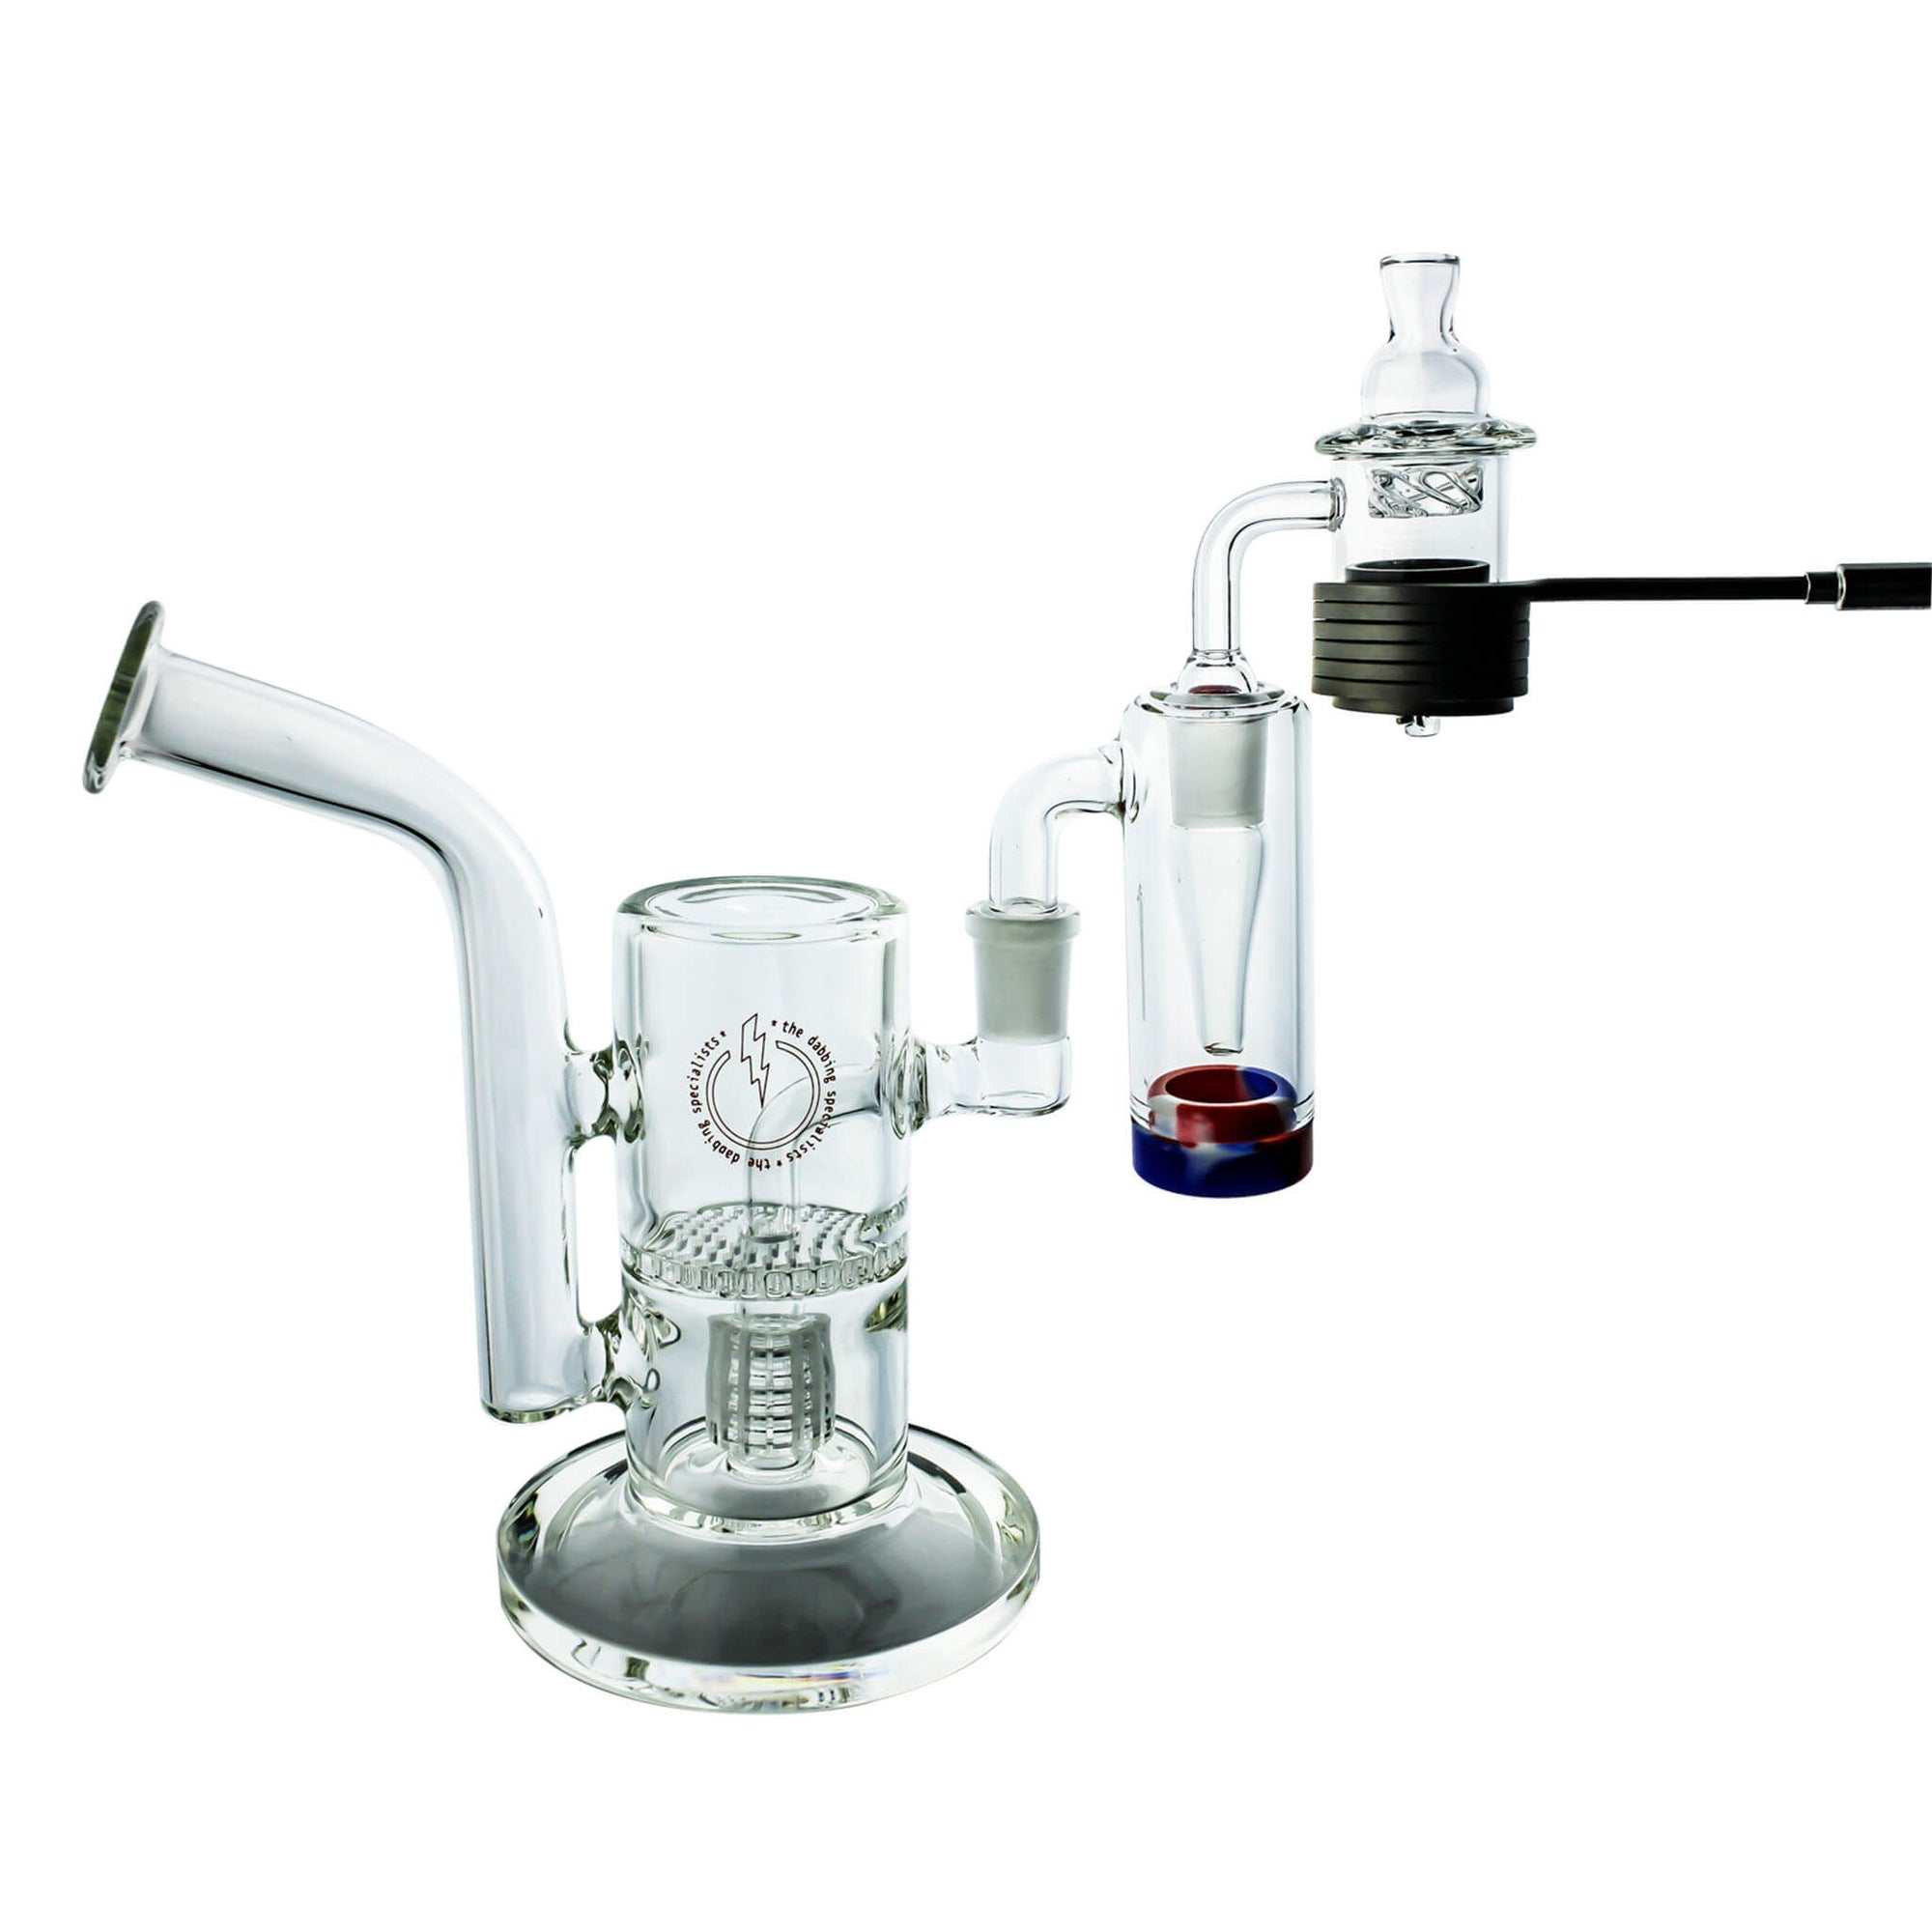 30mm Mini Enail Complete Dabbing Kit #4 - 30mm enail and coil | Full Kit In Use View | DW